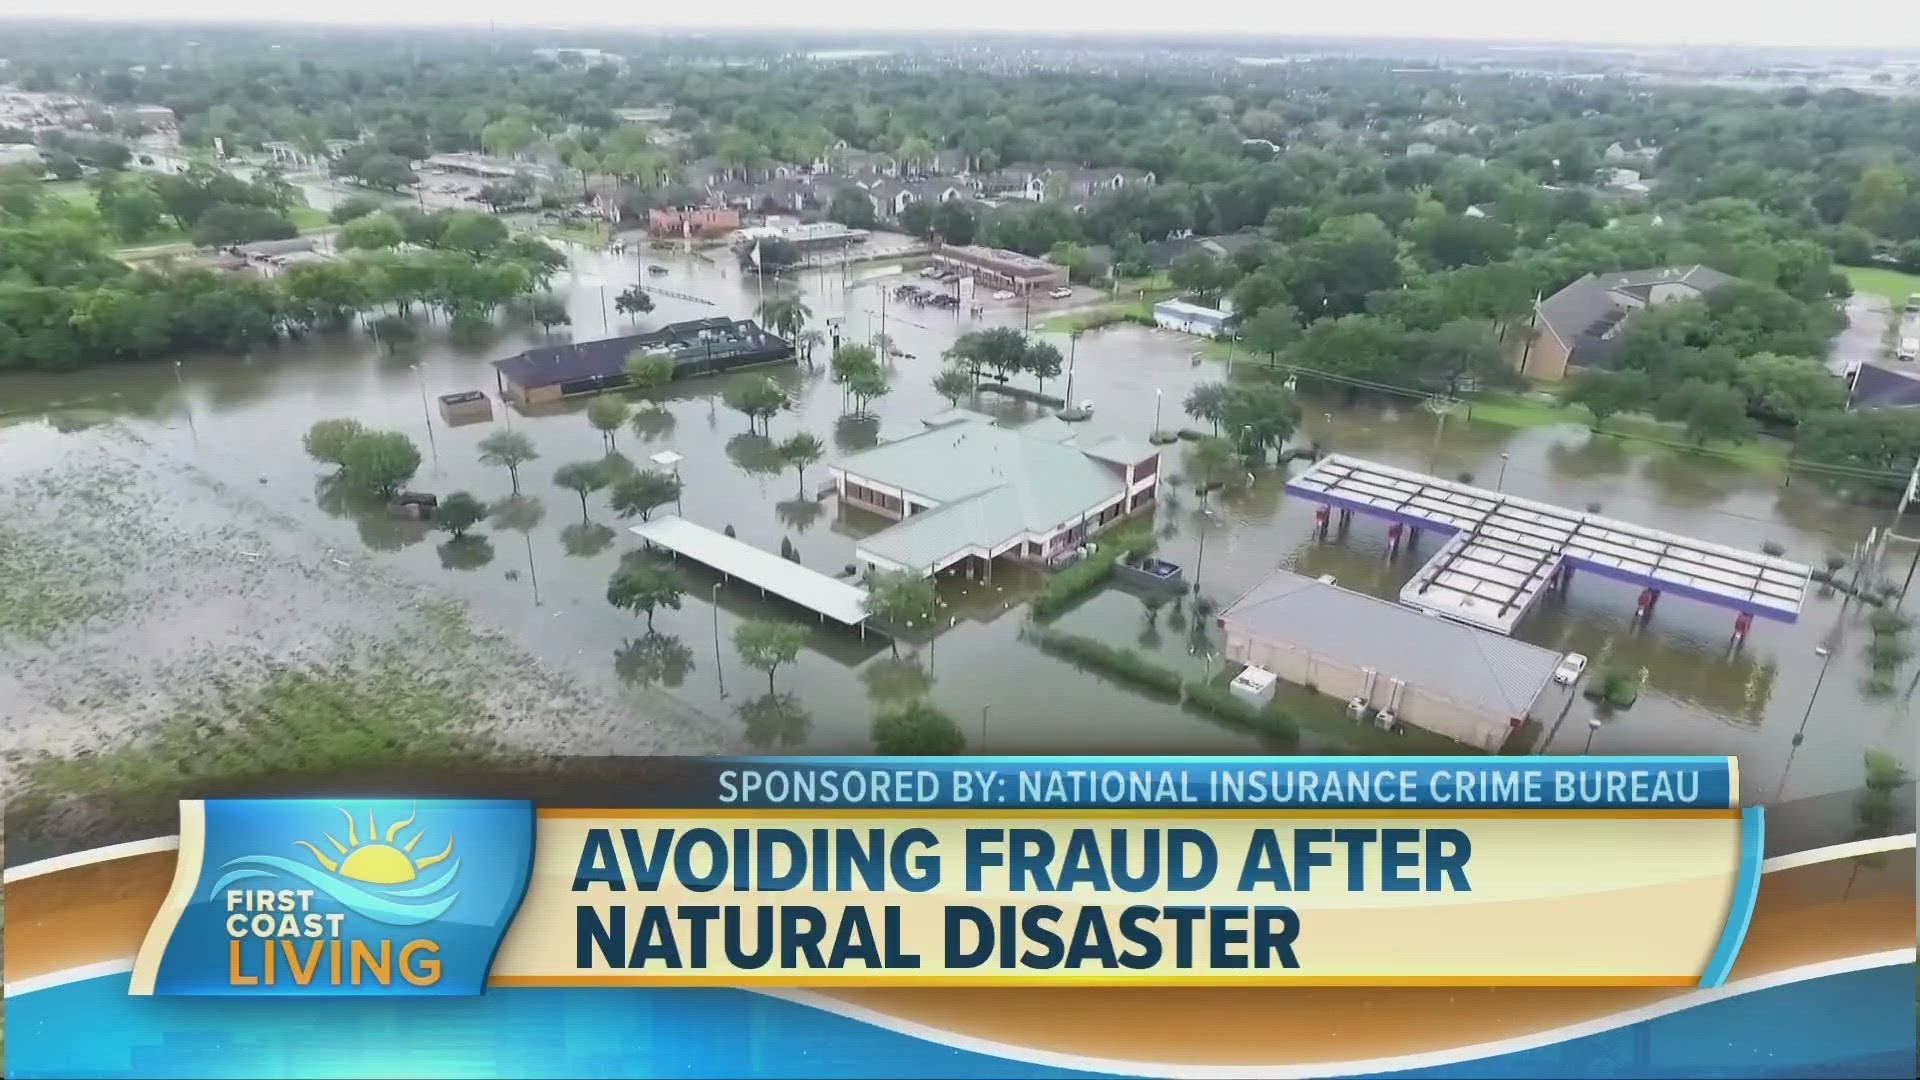 David Glawe, the National Insurance Crime Bureau’s President And CEO, gives insights on how to avoid fraud after a natural disaster.